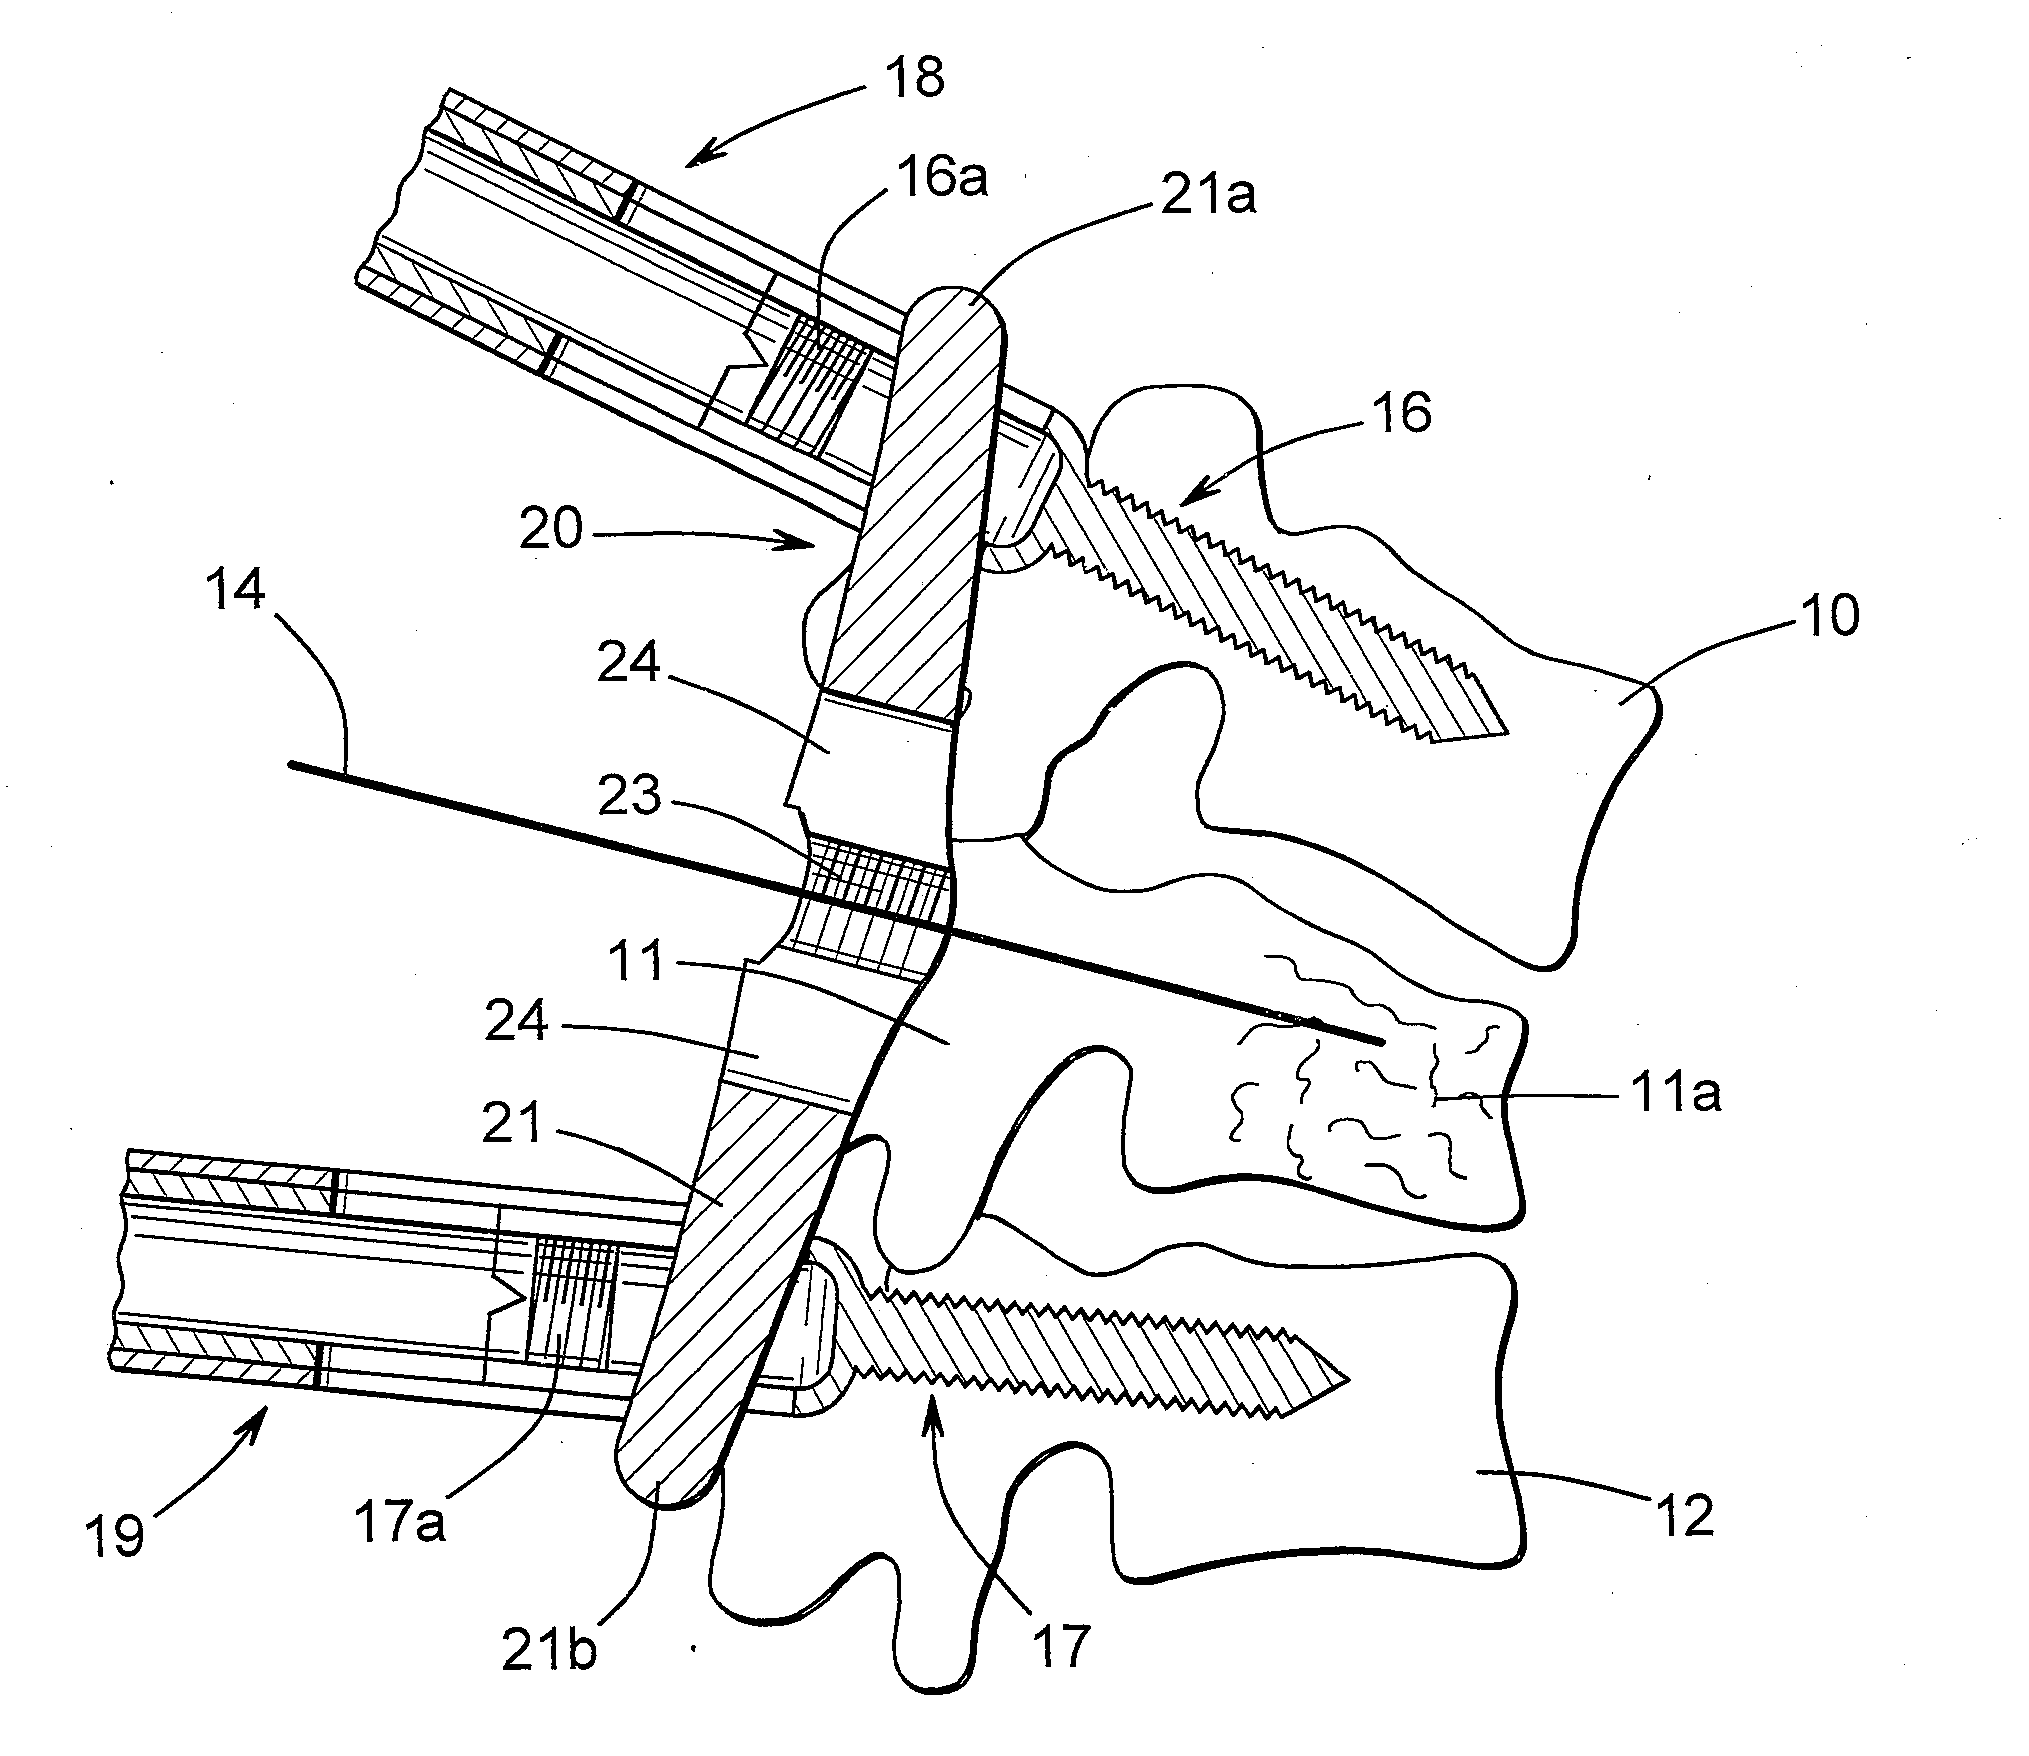 Posterior fixation device for percutaneous stabilization of thoracic and lumbar burst fractures